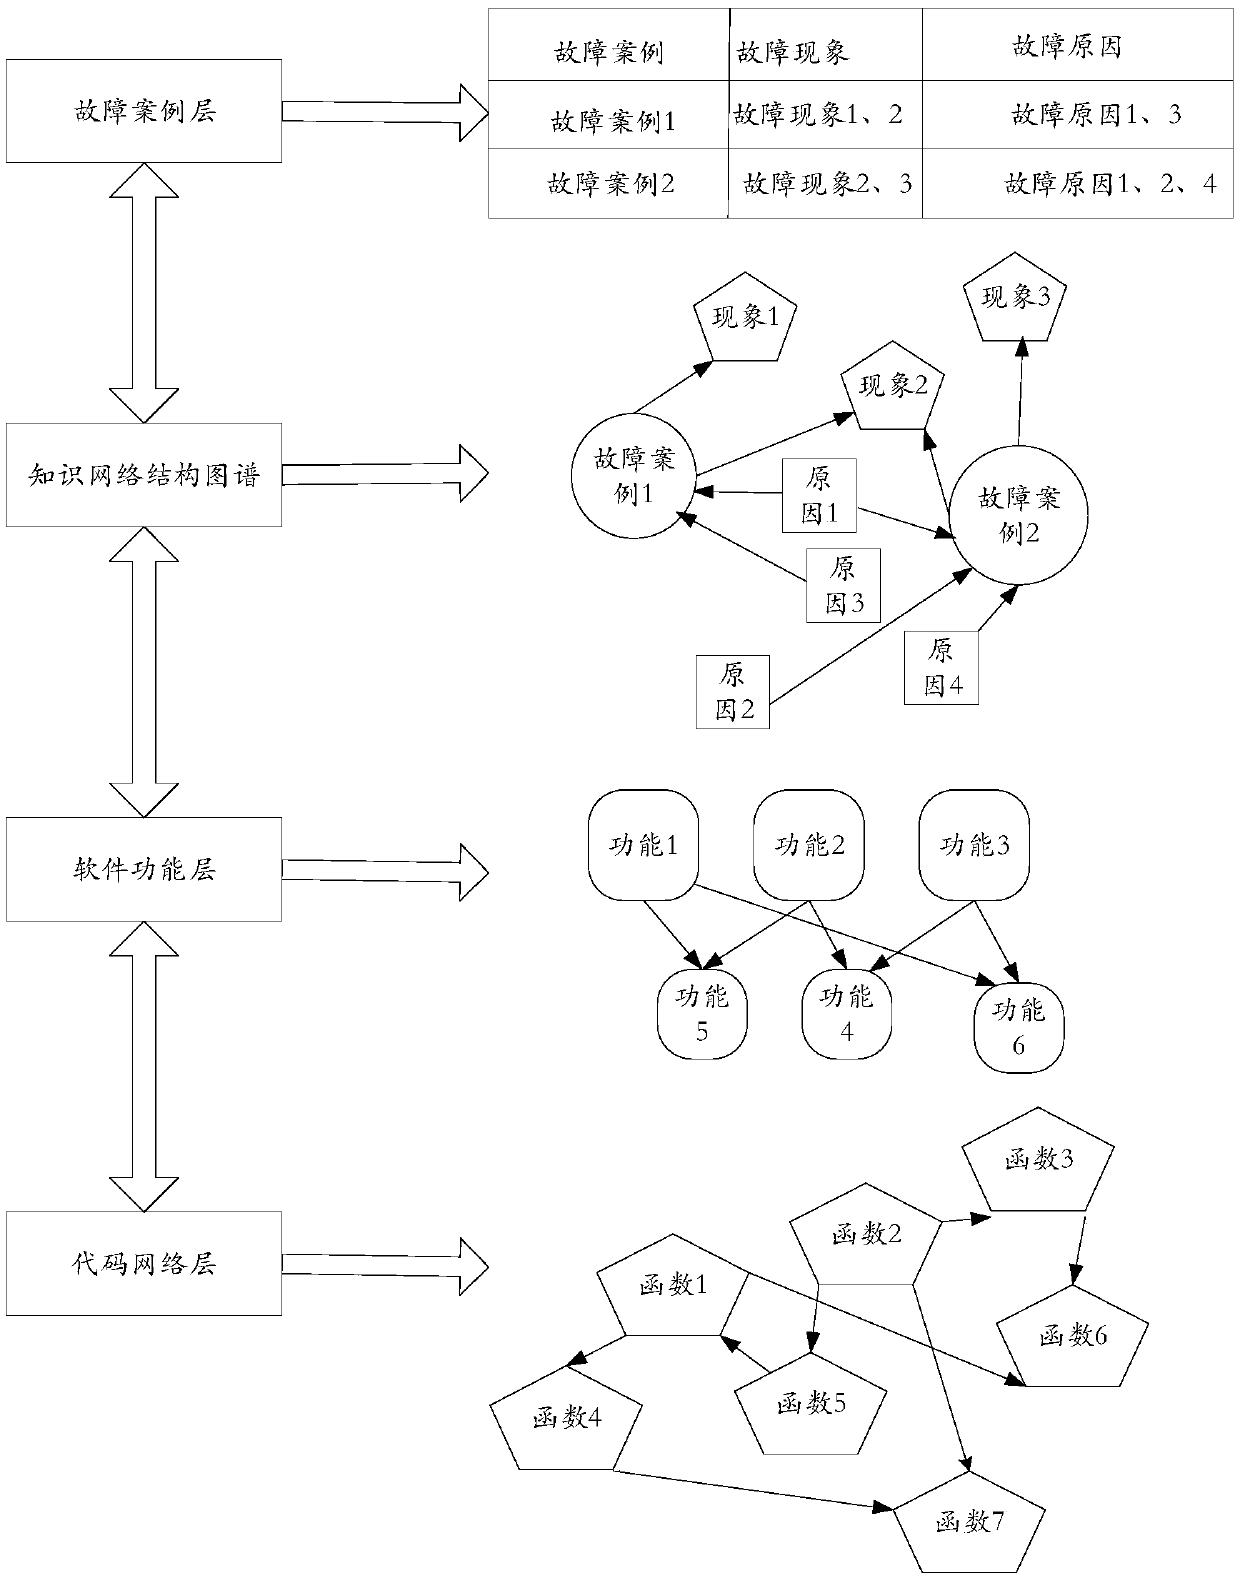 A forecasting method based on knowledge map and complex network combination